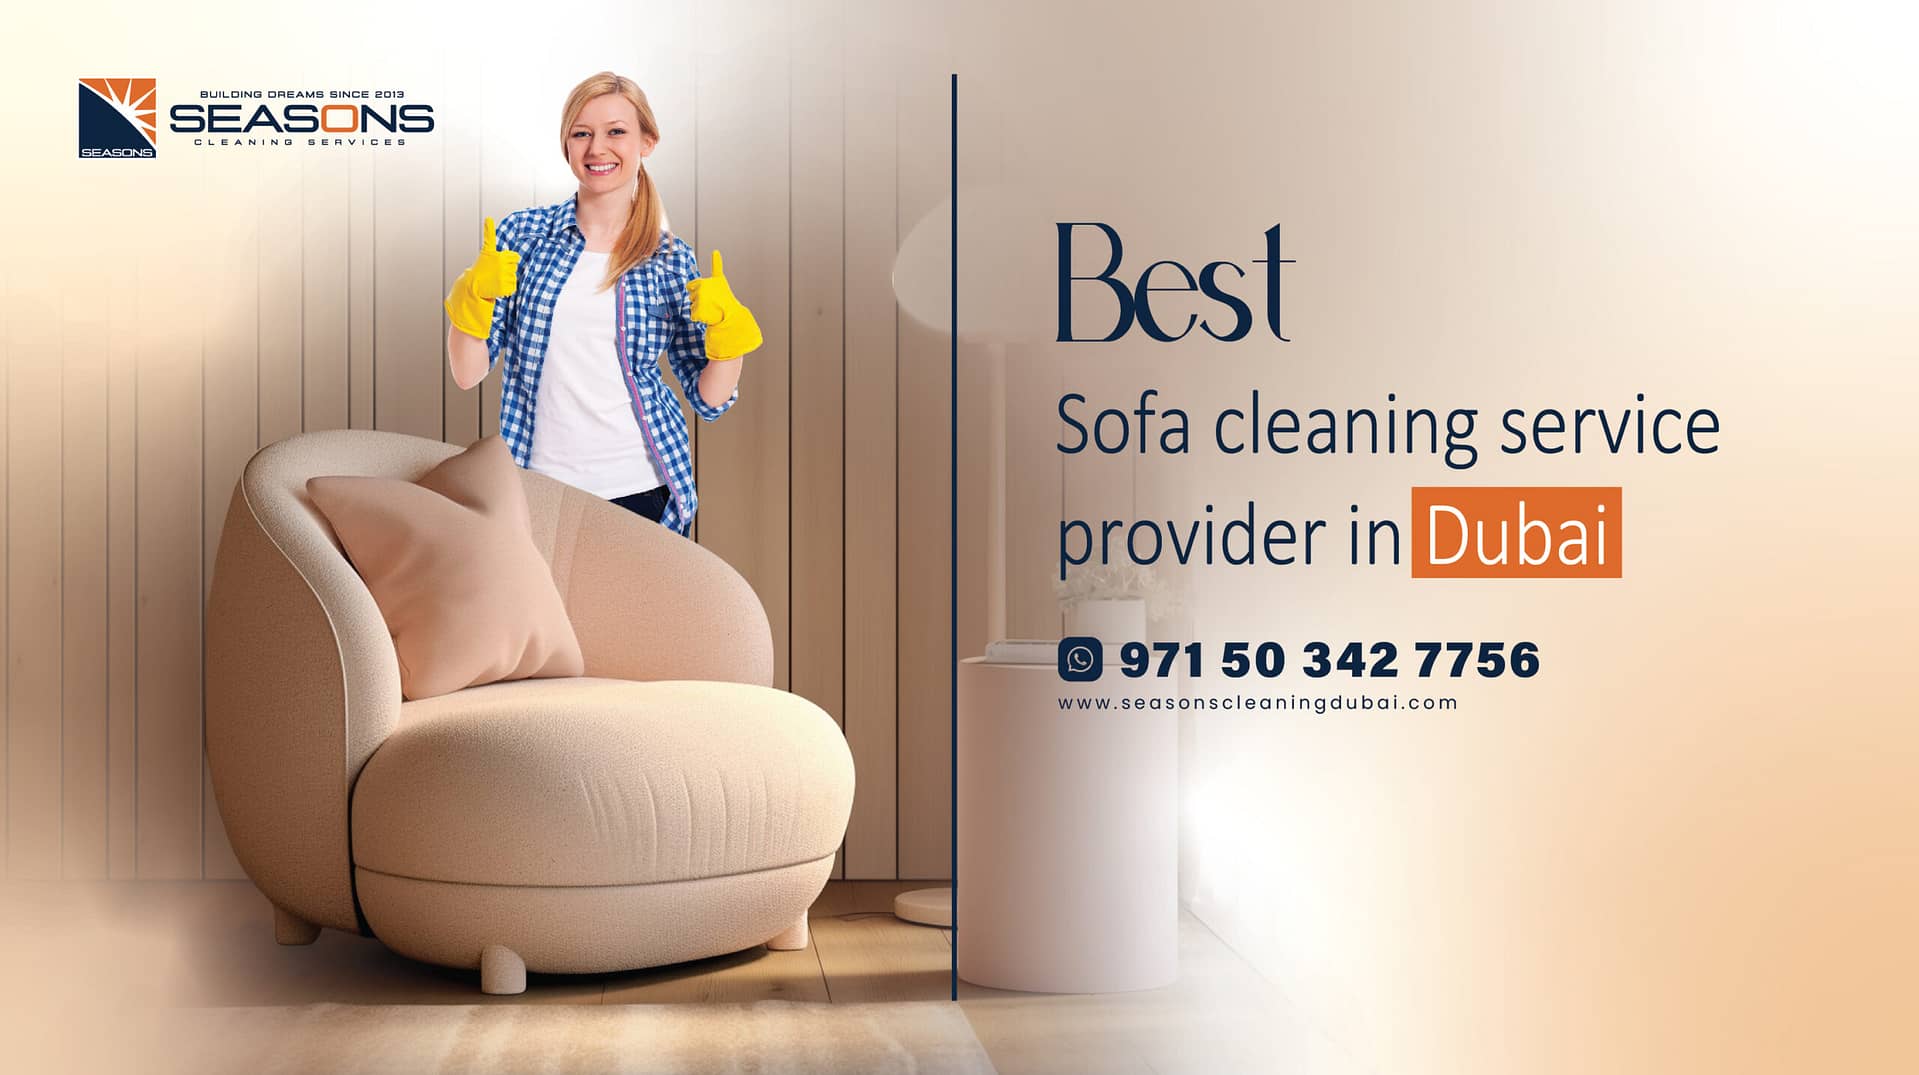 Best sofa cleaning service provider in Dubai